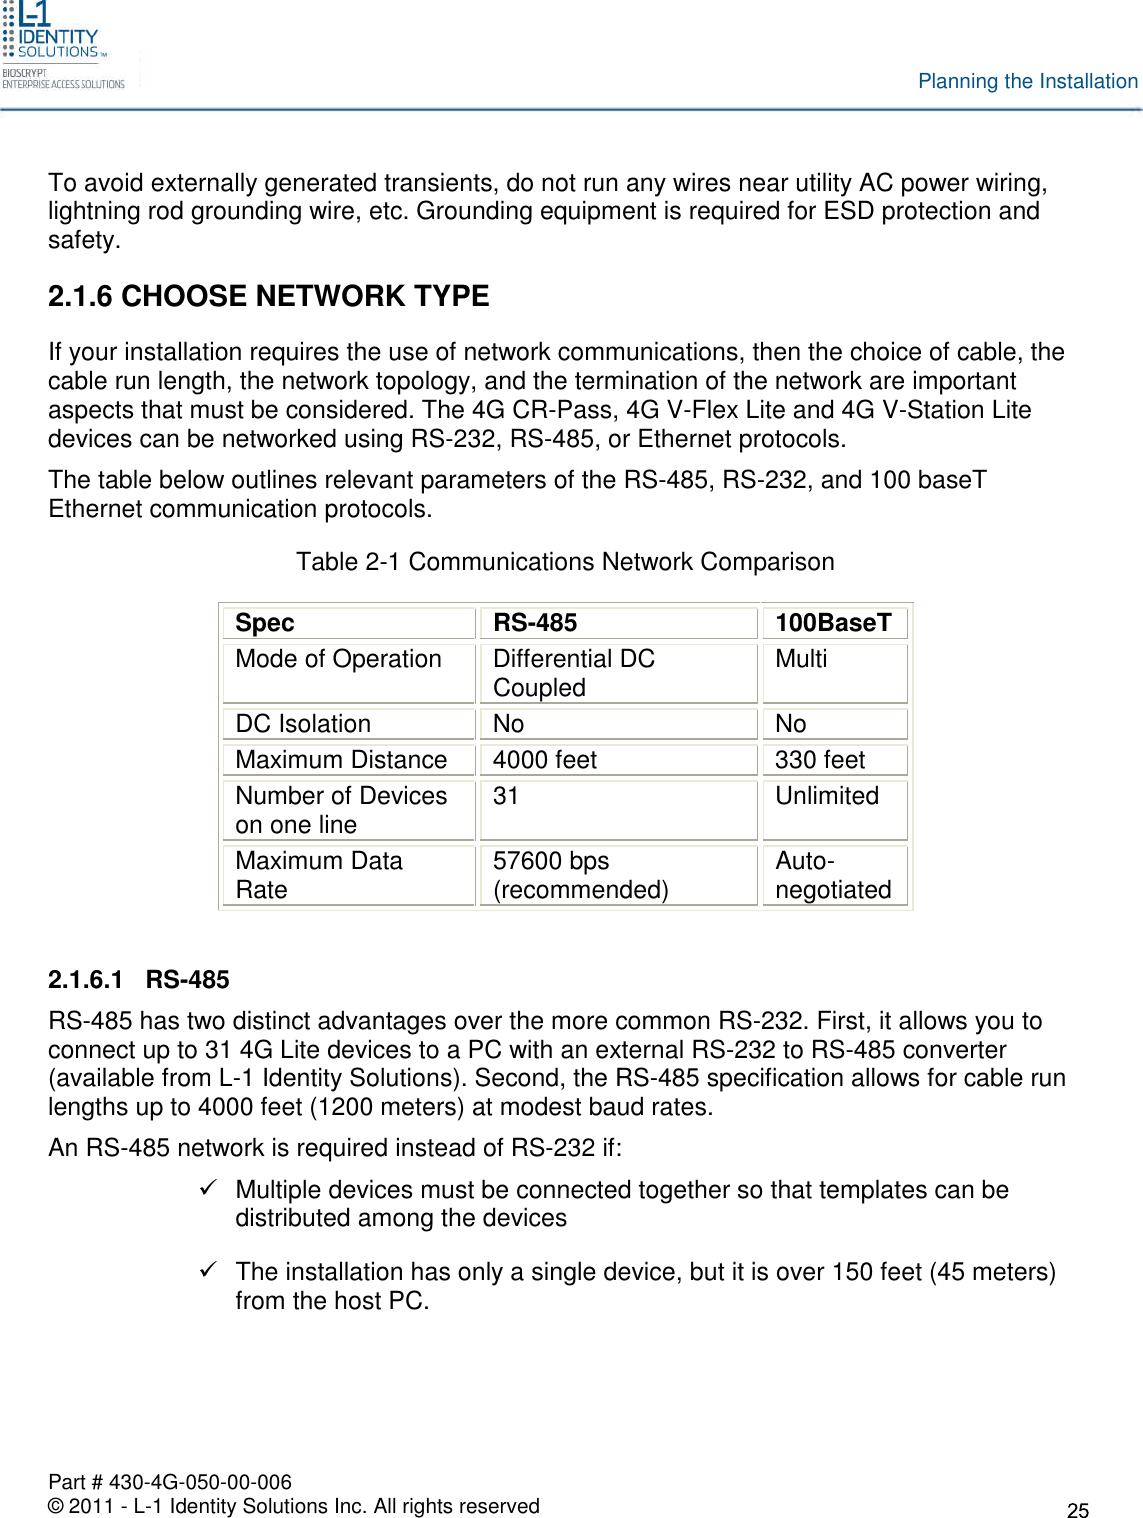 Part # 430-4G-050-00-006© 2011 - L-1 Identity Solutions Inc. All rights reservedPlanning the InstallationTo avoid externally generated transients, do not run any wires near utility AC power wiring,lightning rod grounding wire, etc. Grounding equipment is required for ESD protection andsafety.2.1.6 CHOOSE NETWORK TYPEIf your installation requires the use of network communications, then the choice of cable, thecable run length, the network topology, and the termination of the network are importantaspects that must be considered. The 4G CR-Pass, 4G V-Flex Lite and 4G V-Station Litedevices can be networked using RS-232, RS-485, or Ethernet protocols.The table below outlines relevant parameters of the RS-485, RS-232, and 100 baseTEthernet communication protocols.Table 2-1 Communications Network ComparisonSpecRS-485100BaseTMode of Operation Differential DCCoupled MultiDC Isolation No NoMaximum Distance 4000 feet 330 feetNumber of Deviceson one line 31 UnlimitedMaximum DataRate 57600 bps(recommended) Auto-negotiated2.1.6.1 RS-485RS-485 has two distinct advantages over the more common RS-232. First, it allows you toconnect up to 31 4G Lite devices to a PC with an external RS-232 to RS-485 converter(available from L-1 Identity Solutions). Second, the RS-485 specification allows for cable runlengths up to 4000 feet (1200 meters) at modest baud rates.An RS-485 network is required instead of RS-232 if:Multiple devices must be connected together so that templates can bedistributed among the devicesThe installation has only a single device, but it is over 150 feet (45 meters)from the host PC.